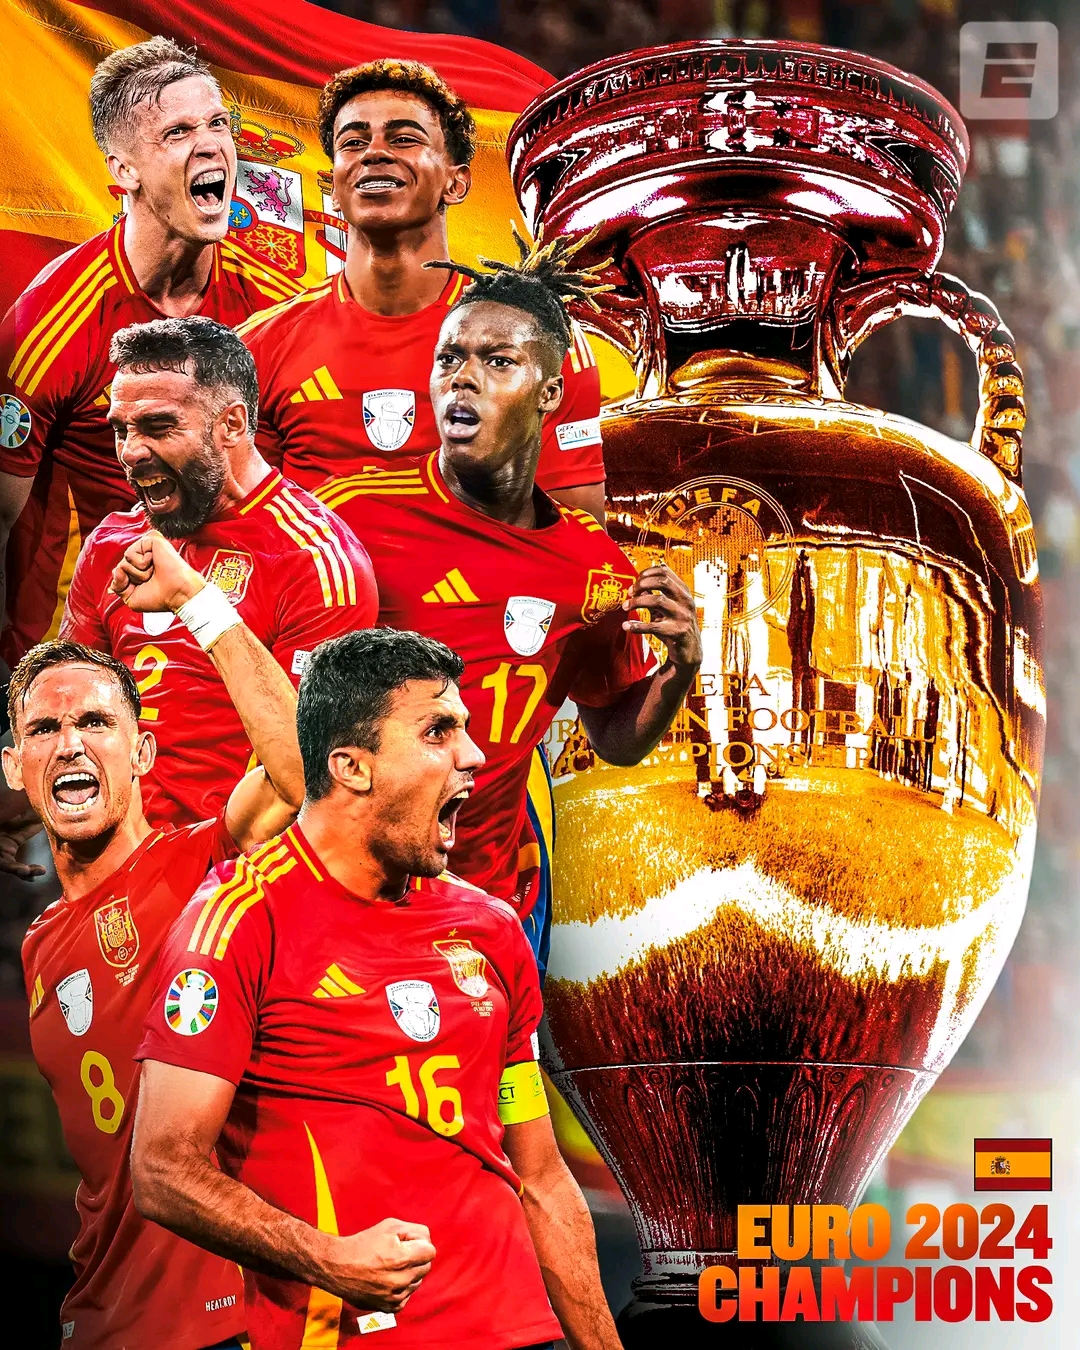 Spain Clinches Record-Breaking Fourth European Championship with 2-1 Victory Over England